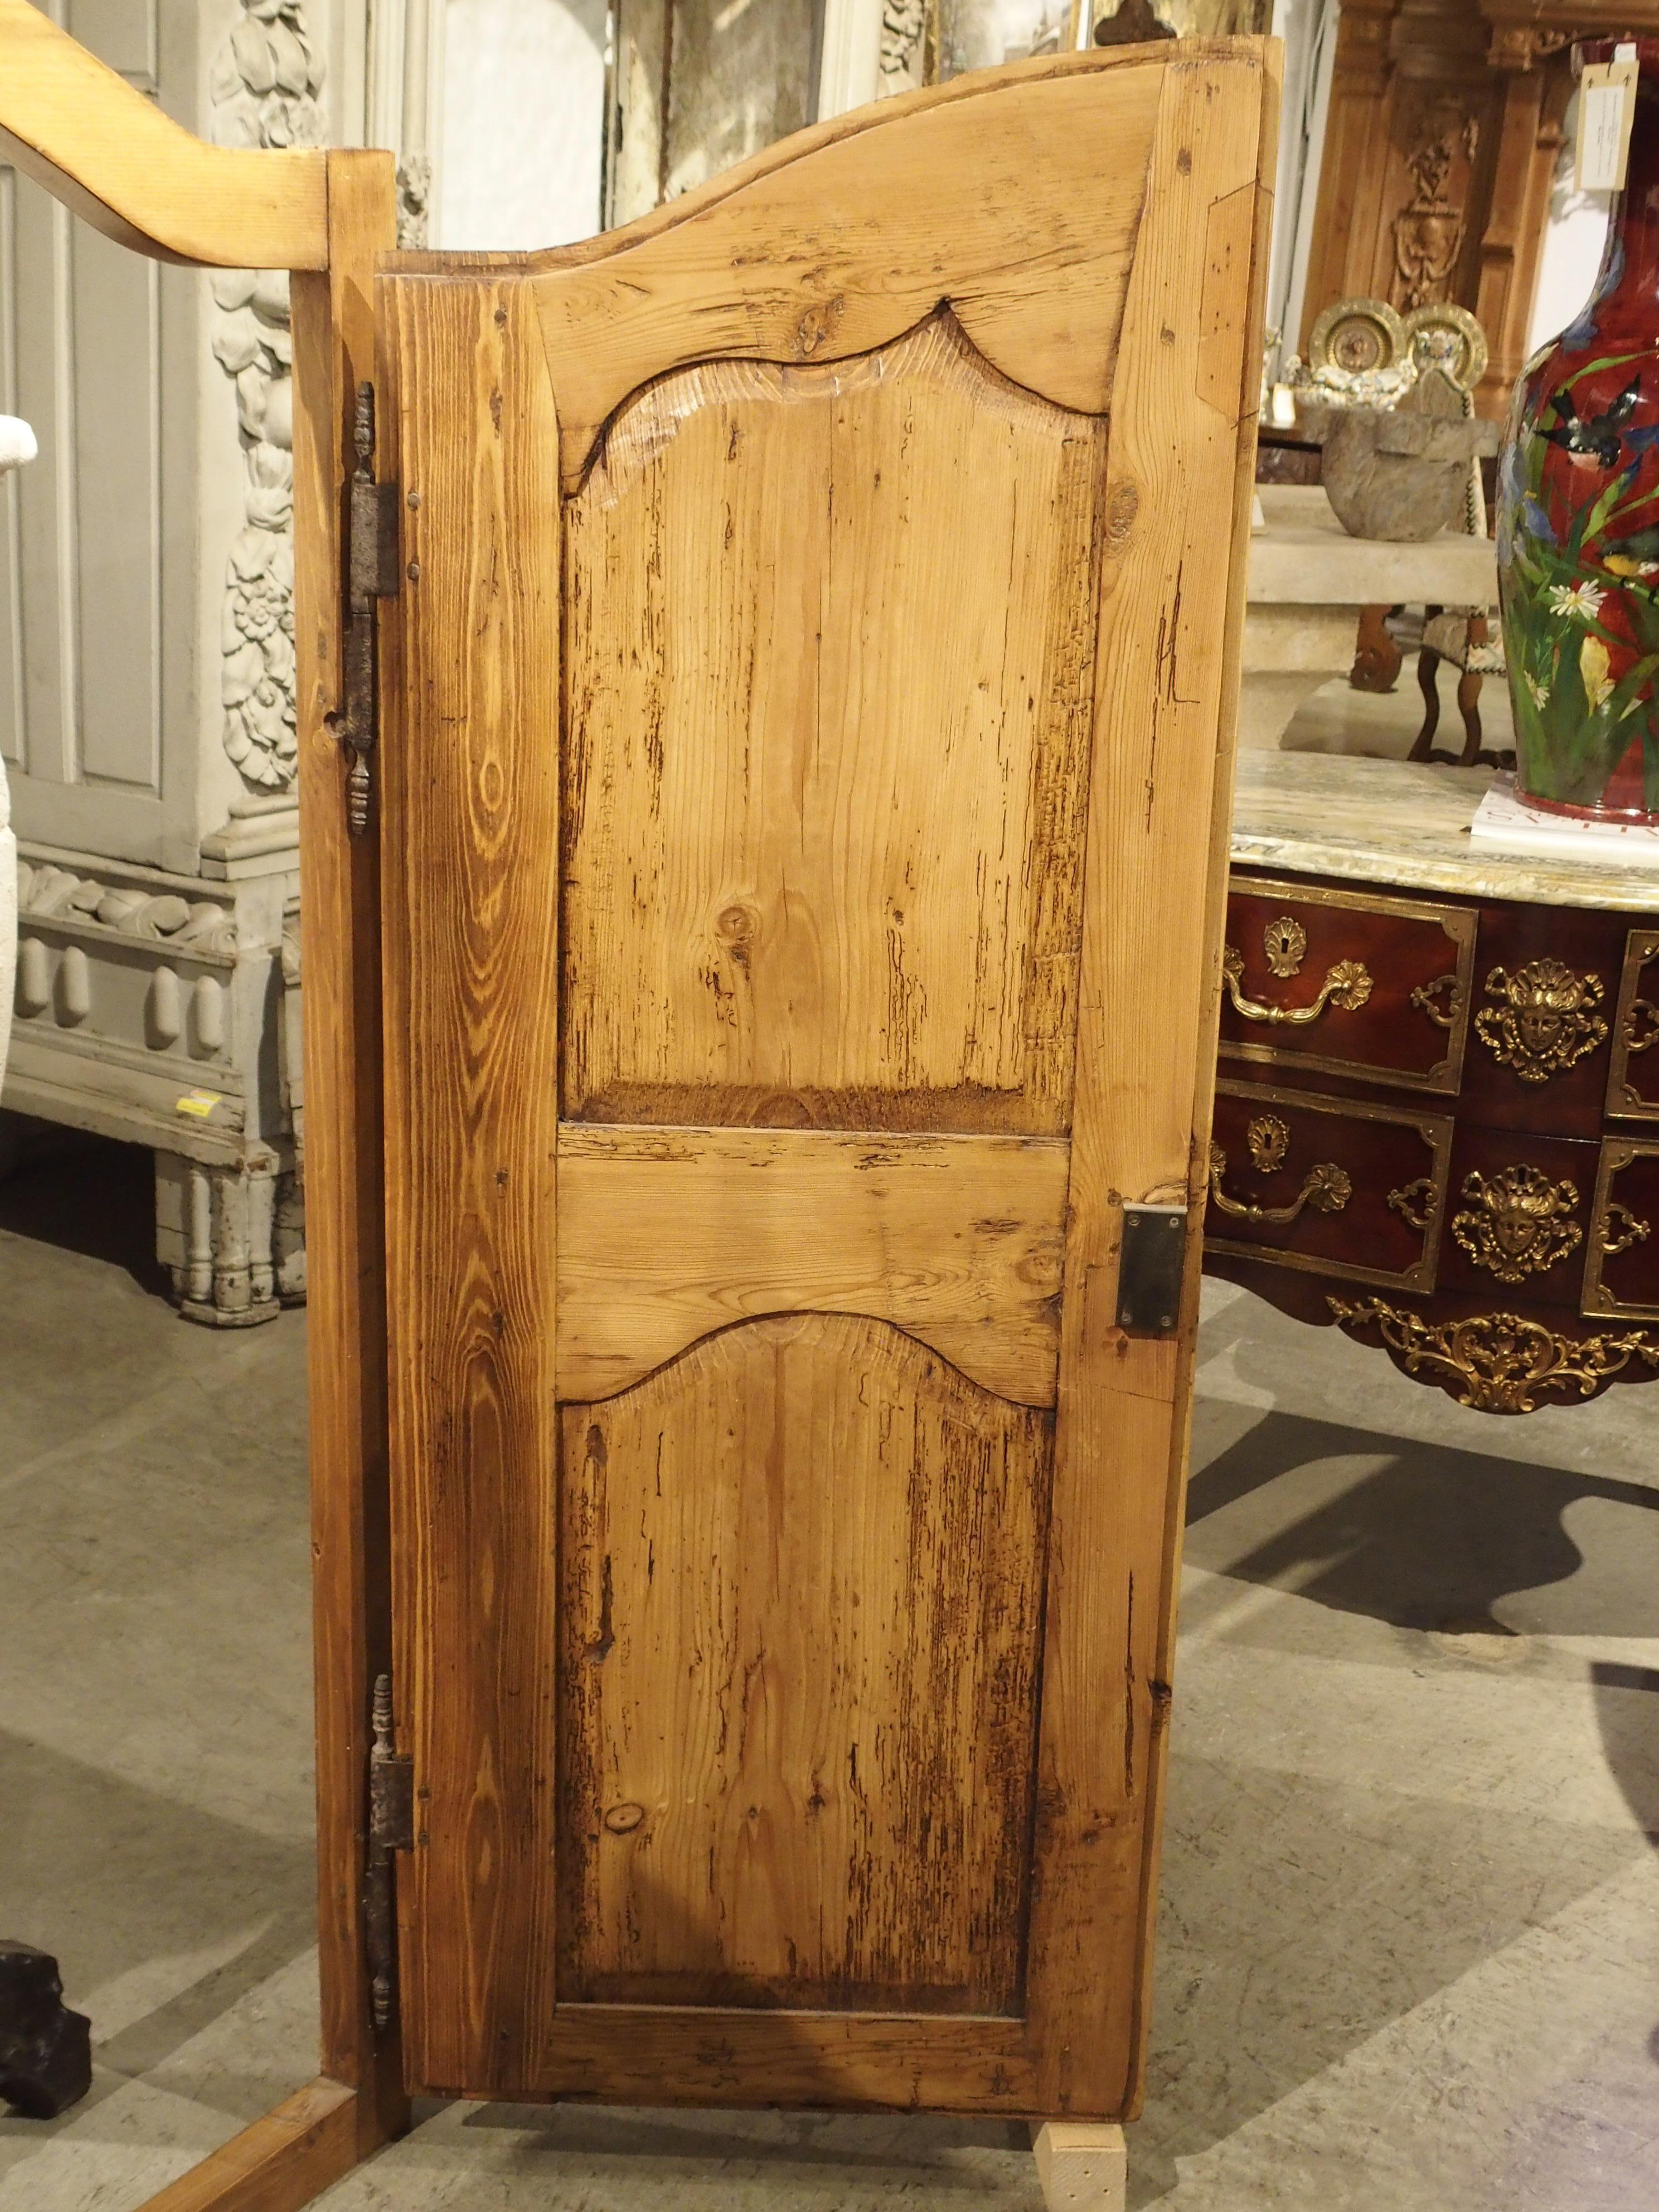 These versatile antique French framed doors probably once graced the front of a deux corps. Today they are used as cabinet door frontages, decorative door panels opening to a painting or other decorative object, or astride a mantle as doors for